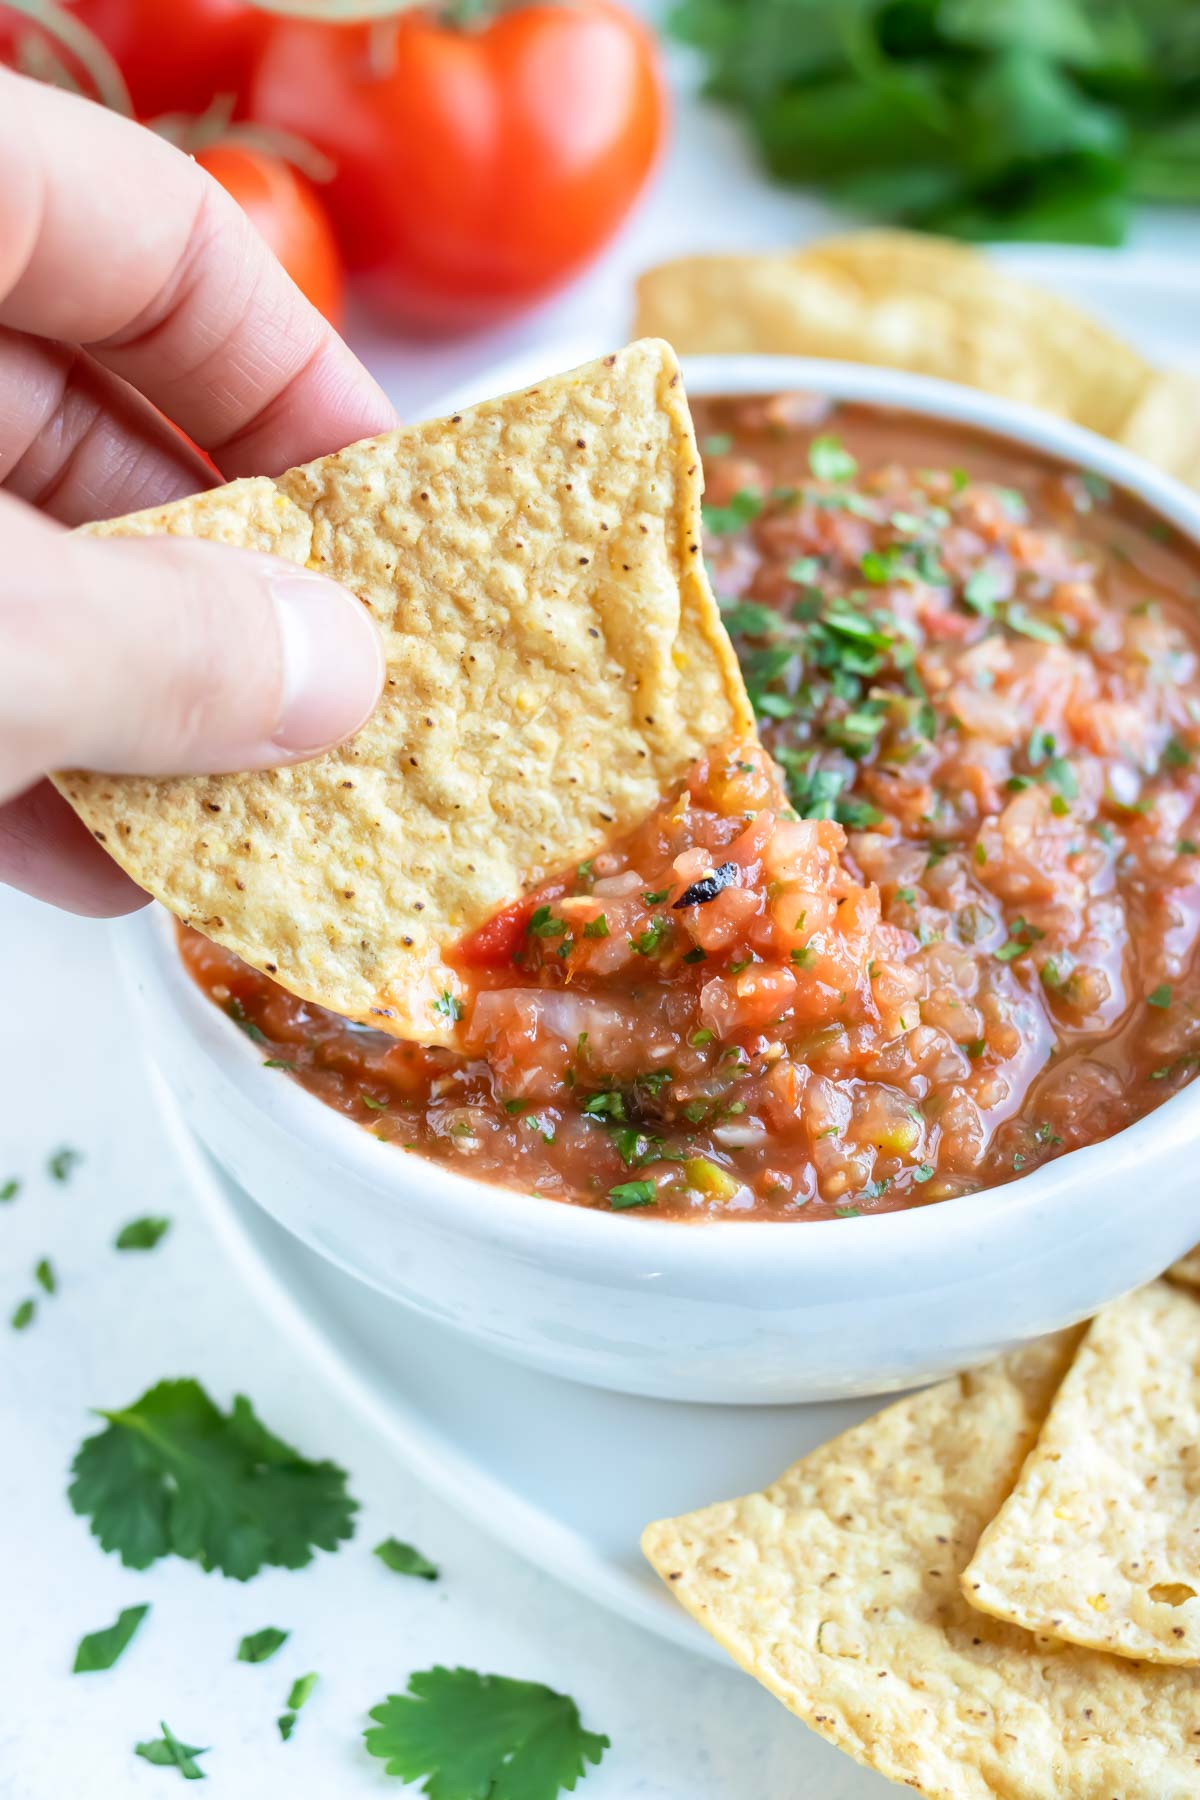 A tortilla chip is dipped into the bowl of roasted tomato salsa.